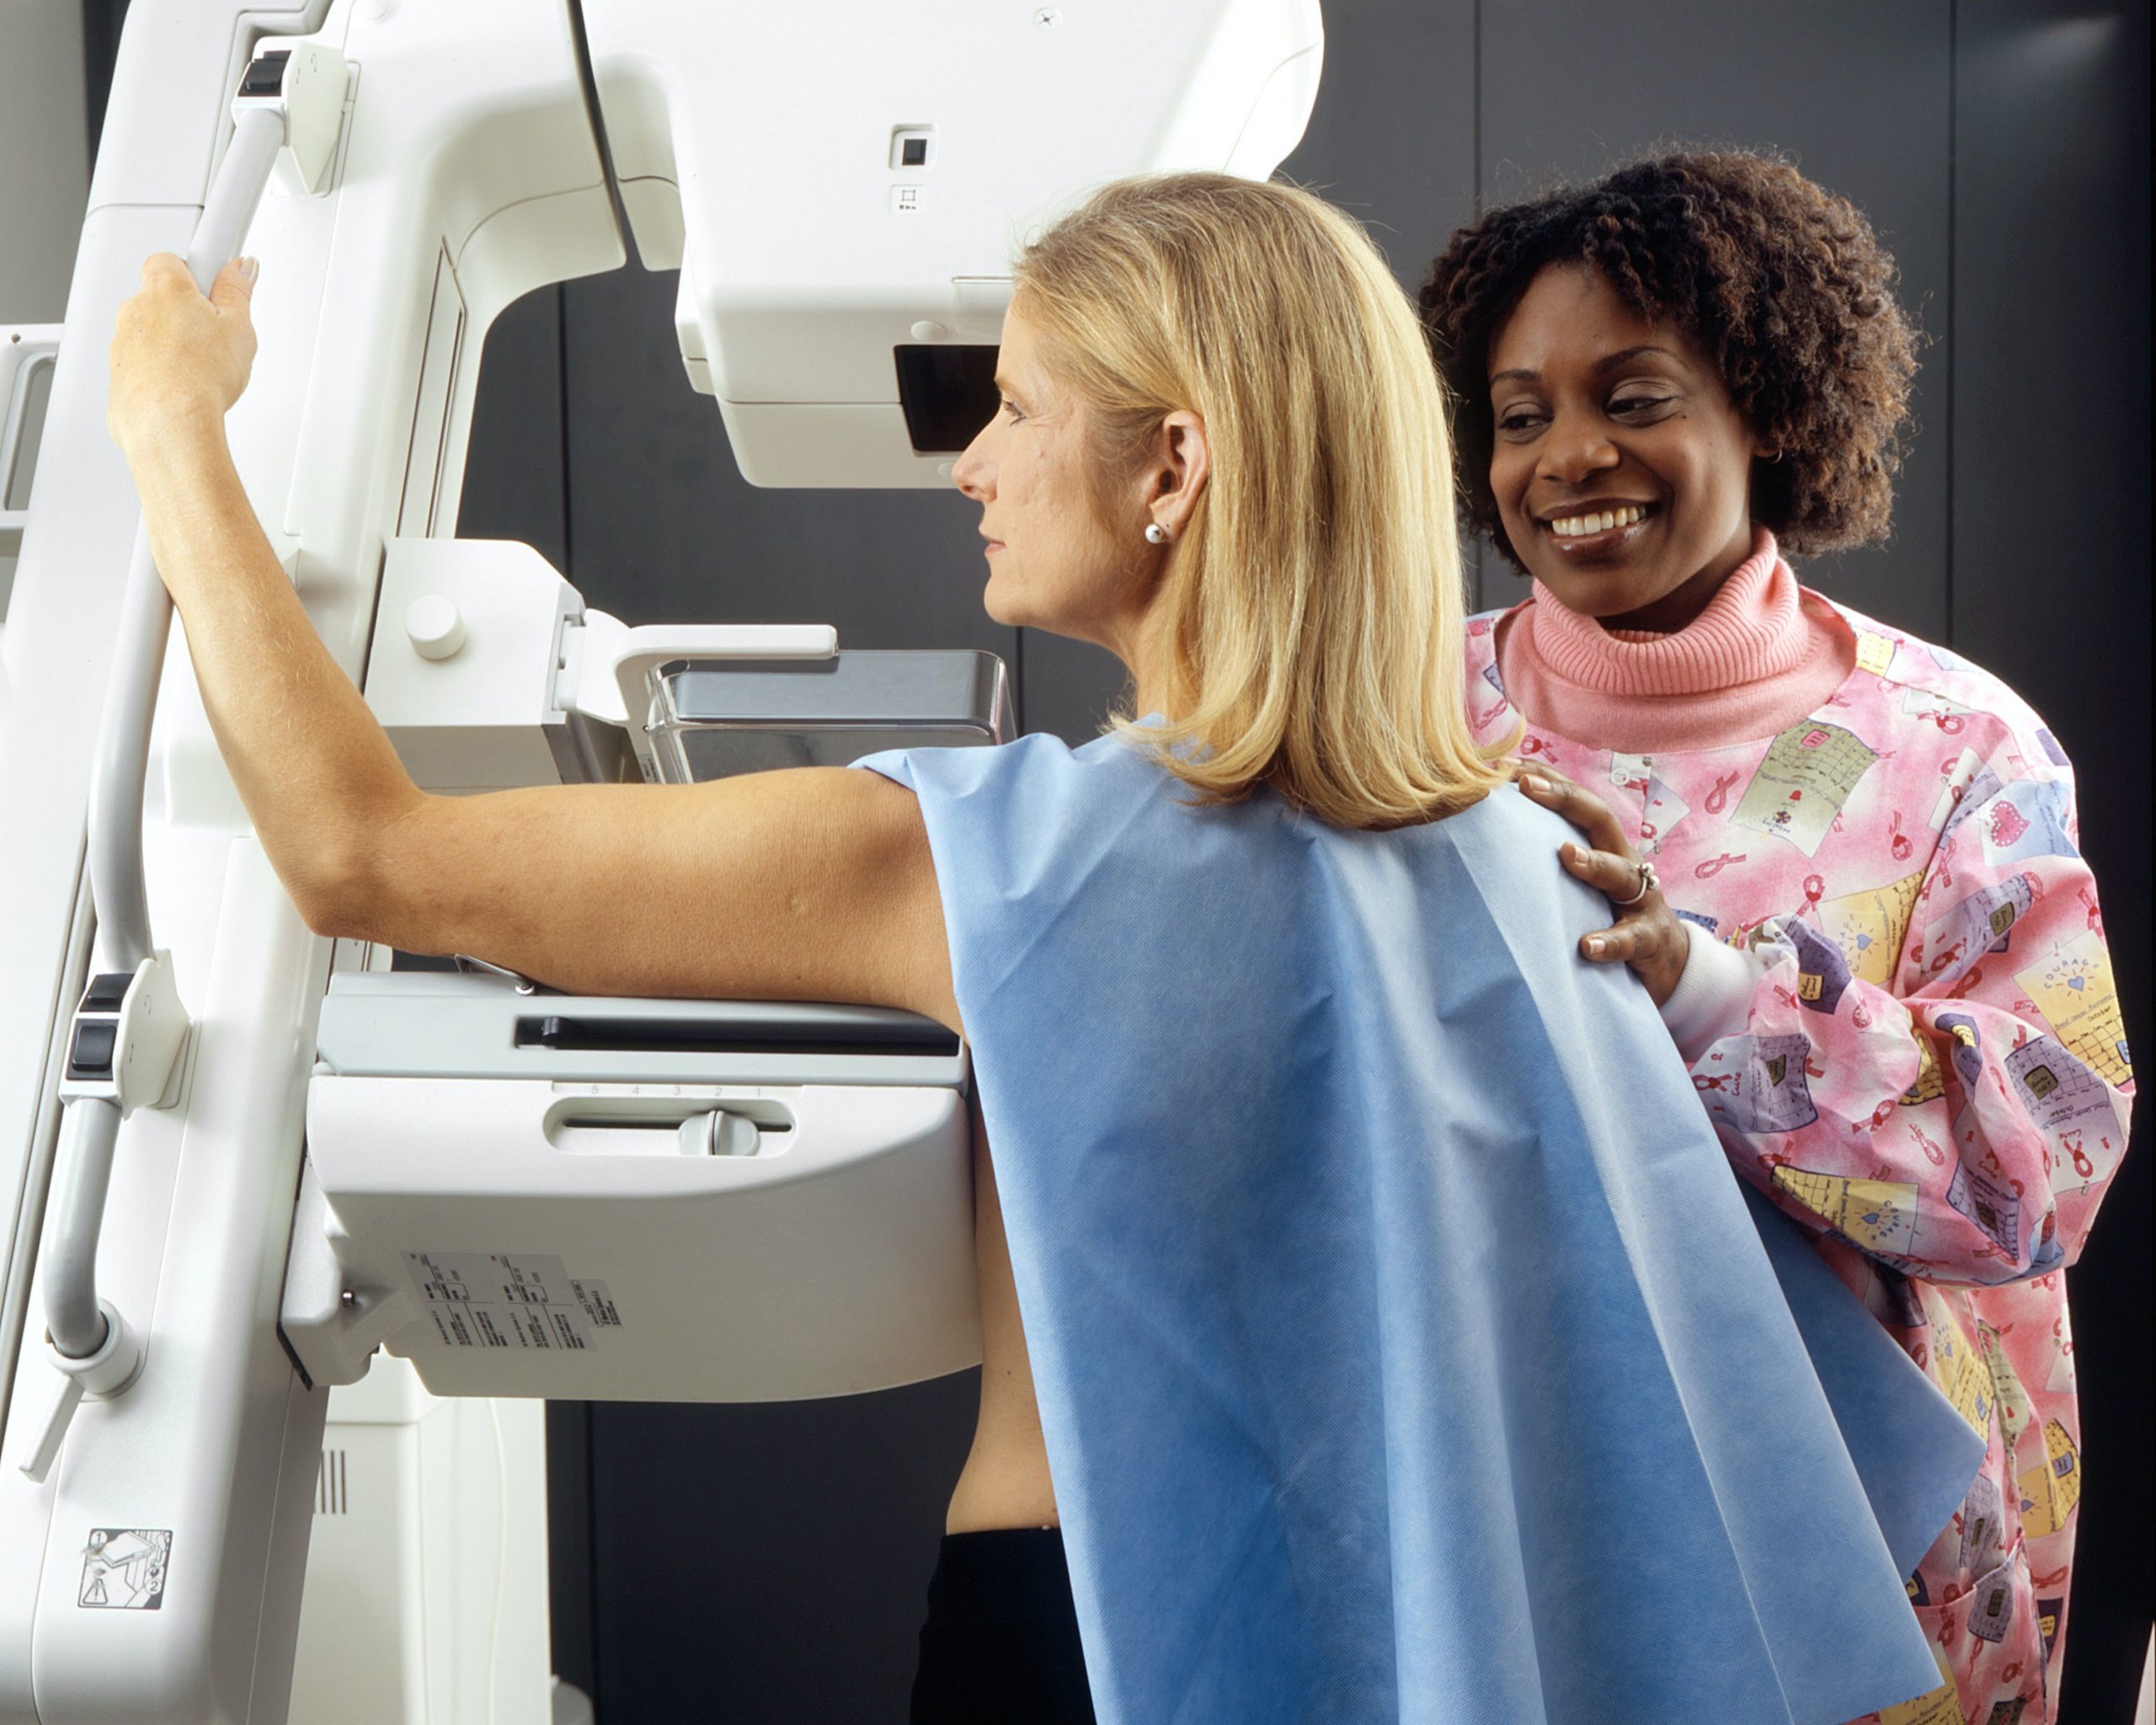 How to Check for Breast Cancer Signs and Symptoms